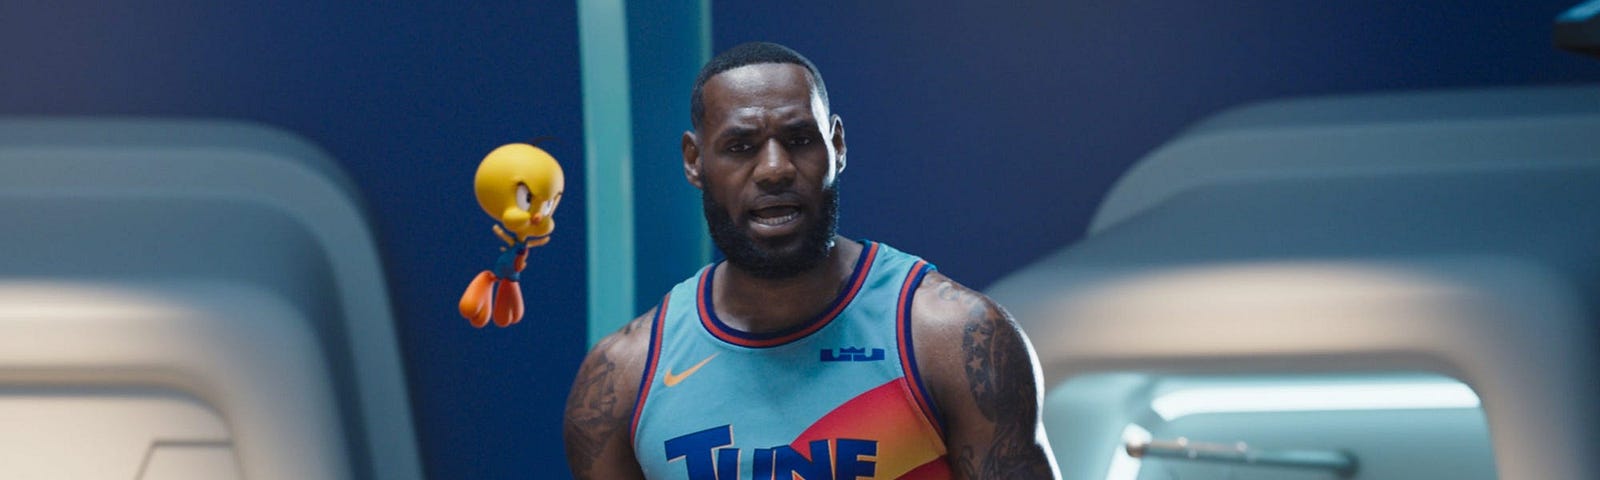 LeBron James in “Space Jam: A New Legacy.”